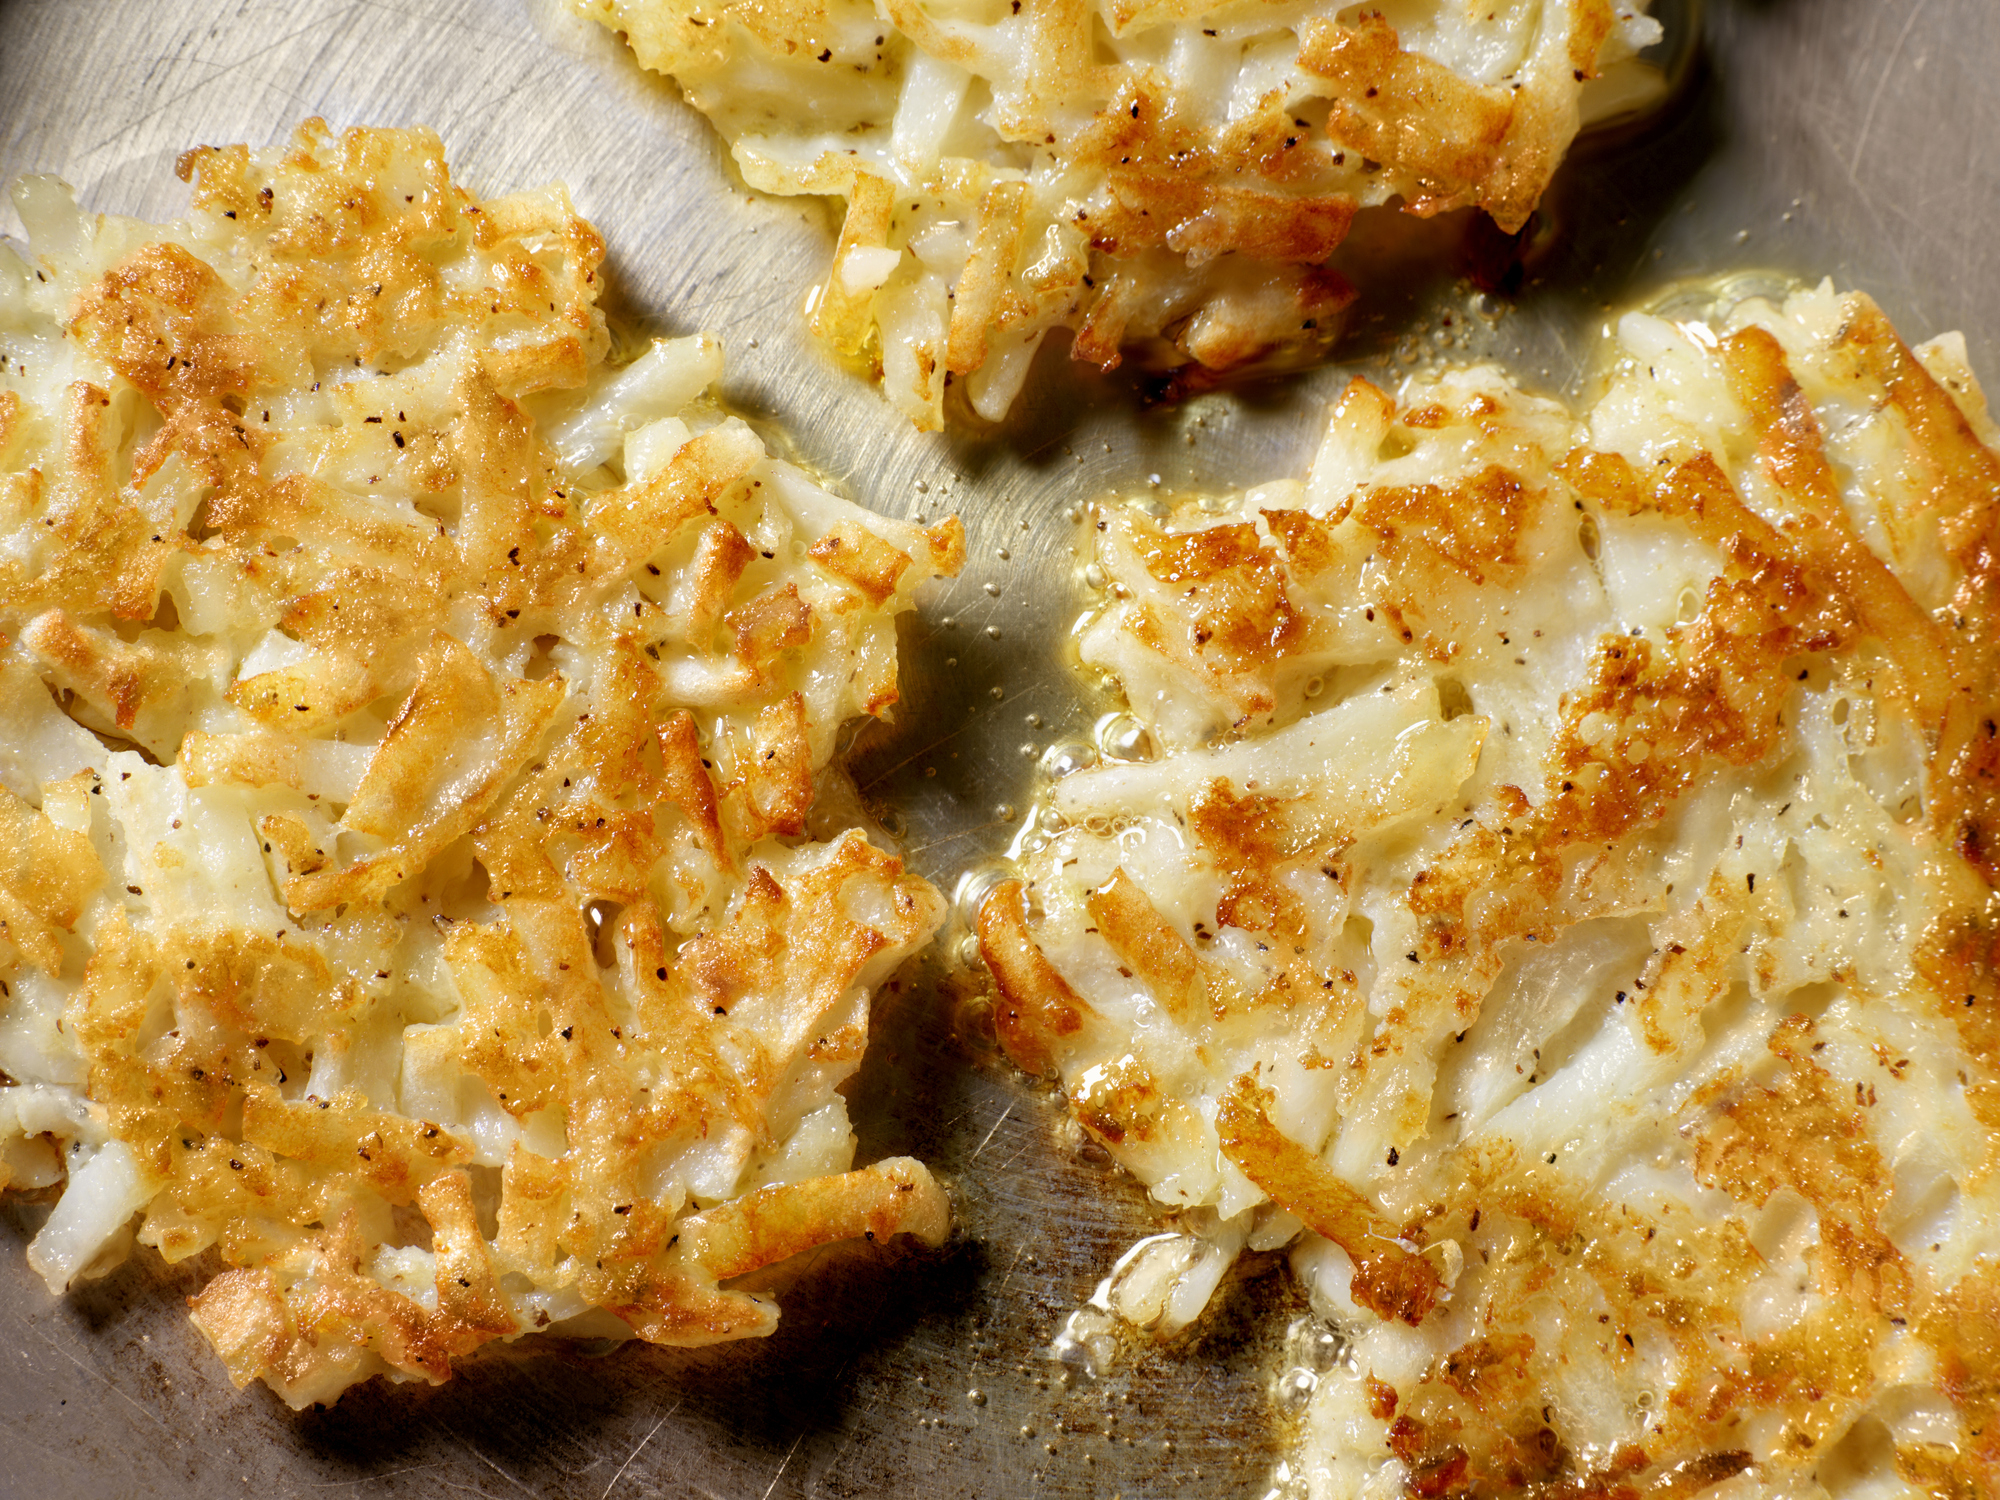 crispy hash browns sizzling in a pan with oil